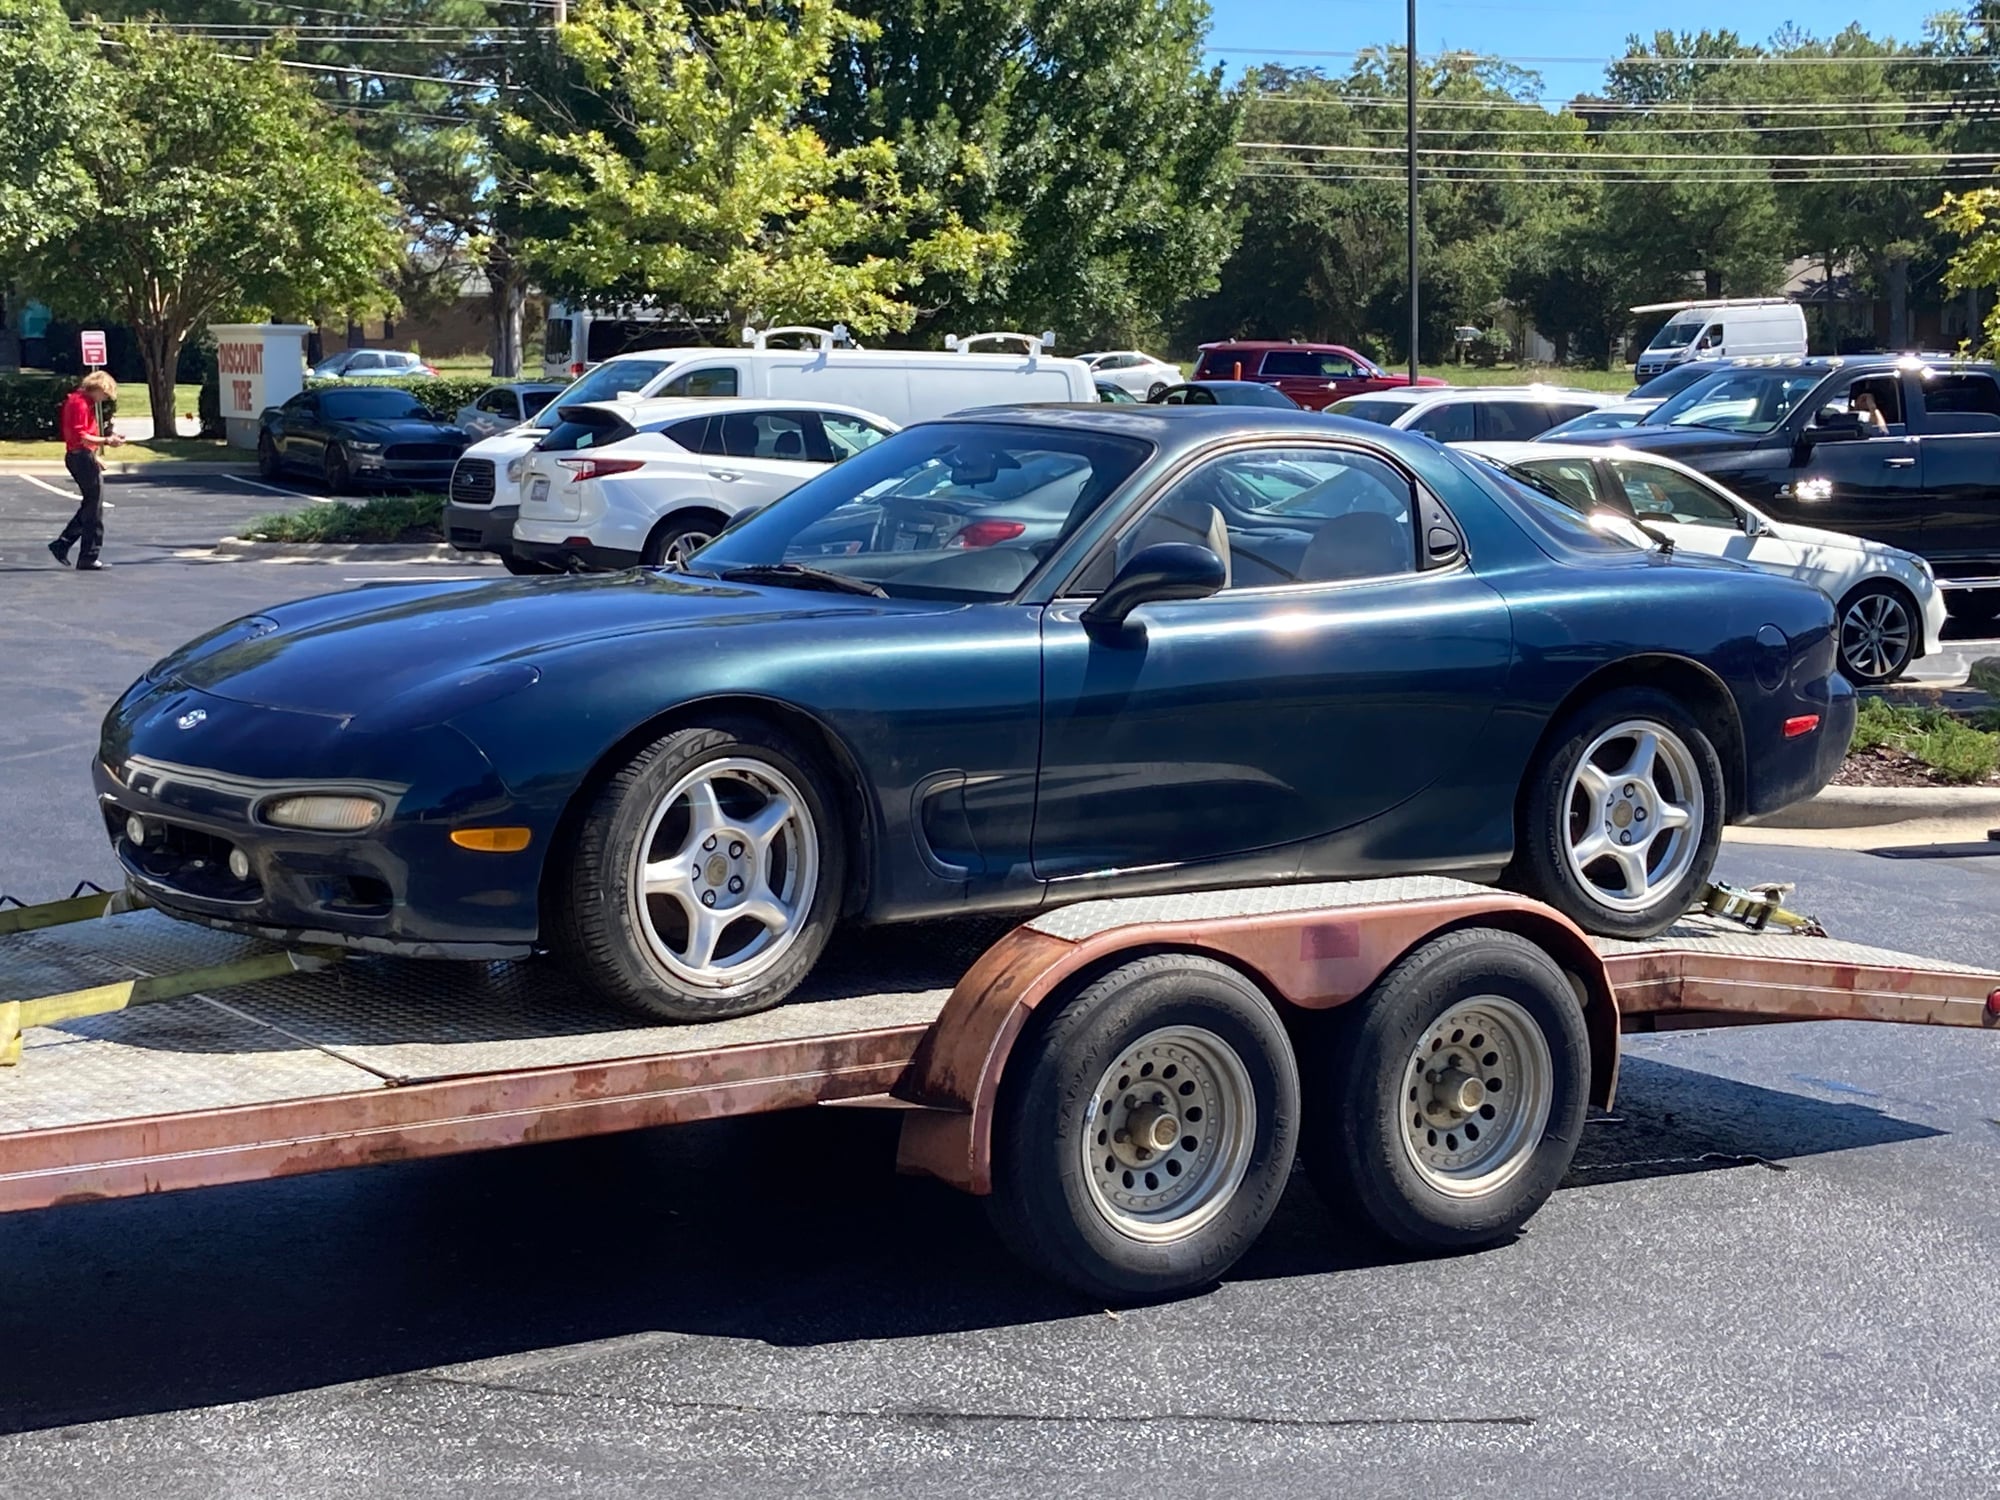 1994 Mazda RX-7 - 1994 MB Bone Stock - Used - VIN JM1FD3330R0303461 - 75,000 Miles - Other - Manual - Other - High Point, NC 27265, United States